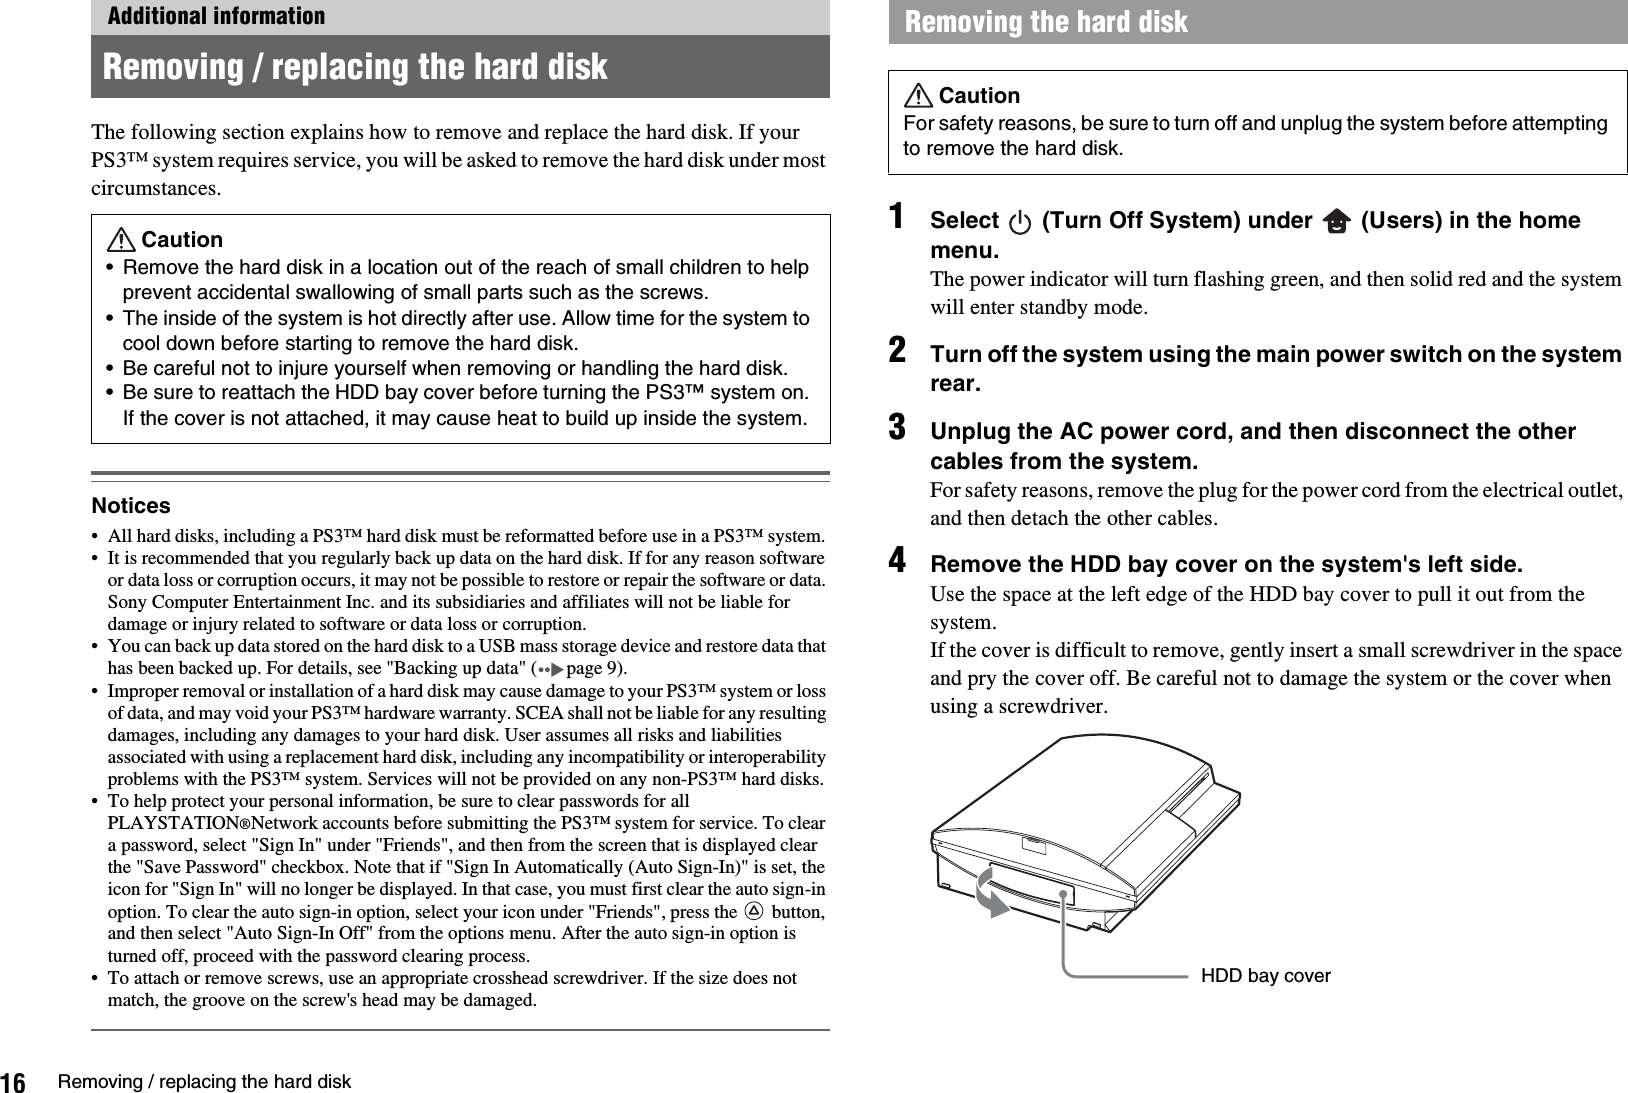 16 Removing / replacing the hard diskThe following section explains how to remove and replace the hard disk. If your PS3™ system requires service, you will be asked to remove the hard disk under most circumstances.Notices• All hard disks, including a PS3™ hard disk must be reformatted before use in a PS3™ system. • It is recommended that you regularly back up data on the hard disk. If for any reason software or data loss or corruption occurs, it may not be possible to restore or repair the software or data. Sony Computer Entertainment Inc. and its subsidiaries and affiliates will not be liable for damage or injury related to software or data loss or corruption. • You can back up data stored on the hard disk to a USB mass storage device and restore data that has been backed up. For details, see &quot;Backing up data&quot; ( page 9).• Improper removal or installation of a hard disk may cause damage to your PS3™ system or loss of data, and may void your PS3™ hardware warranty. SCEA shall not be liable for any resulting damages, including any damages to your hard disk. User assumes all risks and liabilities associated with using a replacement hard disk, including any incompatibility or interoperability problems with the PS3™ system. Services will not be provided on any non-PS3™ hard disks.• To help protect your personal information, be sure to clear passwords for all PLAYSTATION®Network accounts before submitting the PS3™ system for service. To clear a password, select &quot;Sign In&quot; under &quot;Friends&quot;, and then from the screen that is displayed clear the &quot;Save Password&quot; checkbox. Note that if &quot;Sign In Automatically (Auto Sign-In)&quot; is set, the icon for &quot;Sign In&quot; will no longer be displayed. In that case, you must first clear the auto sign-in option. To clear the auto sign-in option, select your icon under &quot;Friends&quot;, press the   button, and then select &quot;Auto Sign-In Off&quot; from the options menu. After the auto sign-in option is turned off, proceed with the password clearing process.• To attach or remove screws, use an appropriate crosshead screwdriver. If the size does not match, the groove on the screw&apos;s head may be damaged.1Select   (Turn Off System) under   (Users) in the home menu.The power indicator will turn flashing green, and then solid red and the system will enter standby mode.2Turn off the system using the main power switch on the system rear.3Unplug the AC power cord, and then disconnect the other cables from the system.For safety reasons, remove the plug for the power cord from the electrical outlet, and then detach the other cables.4Remove the HDD bay cover on the system&apos;s left side.Use the space at the left edge of the HDD bay cover to pull it out from the system.If the cover is difficult to remove, gently insert a small screwdriver in the space and pry the cover off. Be careful not to damage the system or the cover when using a screwdriver.Additional informationRemoving / replacing the hard diskCaution• Remove the hard disk in a location out of the reach of small children to help prevent accidental swallowing of small parts such as the screws.• The inside of the system is hot directly after use. Allow time for the system to cool down before starting to remove the hard disk.• Be careful not to injure yourself when removing or handling the hard disk.• Be sure to reattach the HDD bay cover before turning the PS3™ system on. If the cover is not attached, it may cause heat to build up inside the system.Removing the hard diskCautionFor safety reasons, be sure to turn off and unplug the system before attempting to remove the hard disk.HDD bay cover